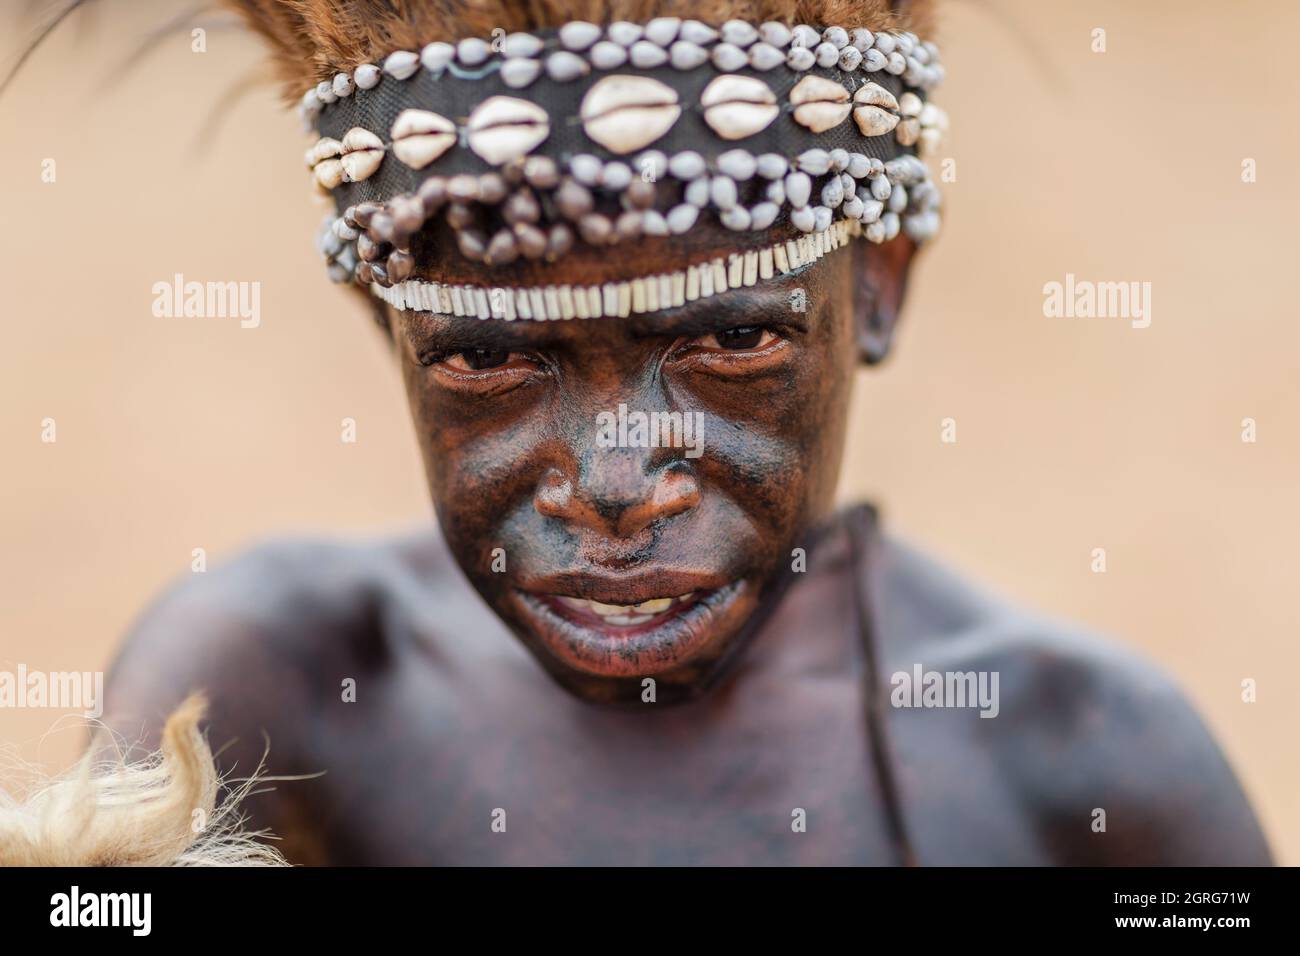 Indonesia, Papua, city of Wamena, portrait of a young Dani boy. Baliem Valley Cultural Festival, every August, tribes come together to perform ancestral war scenes, parade and dance in traditional clothes Stock Photo